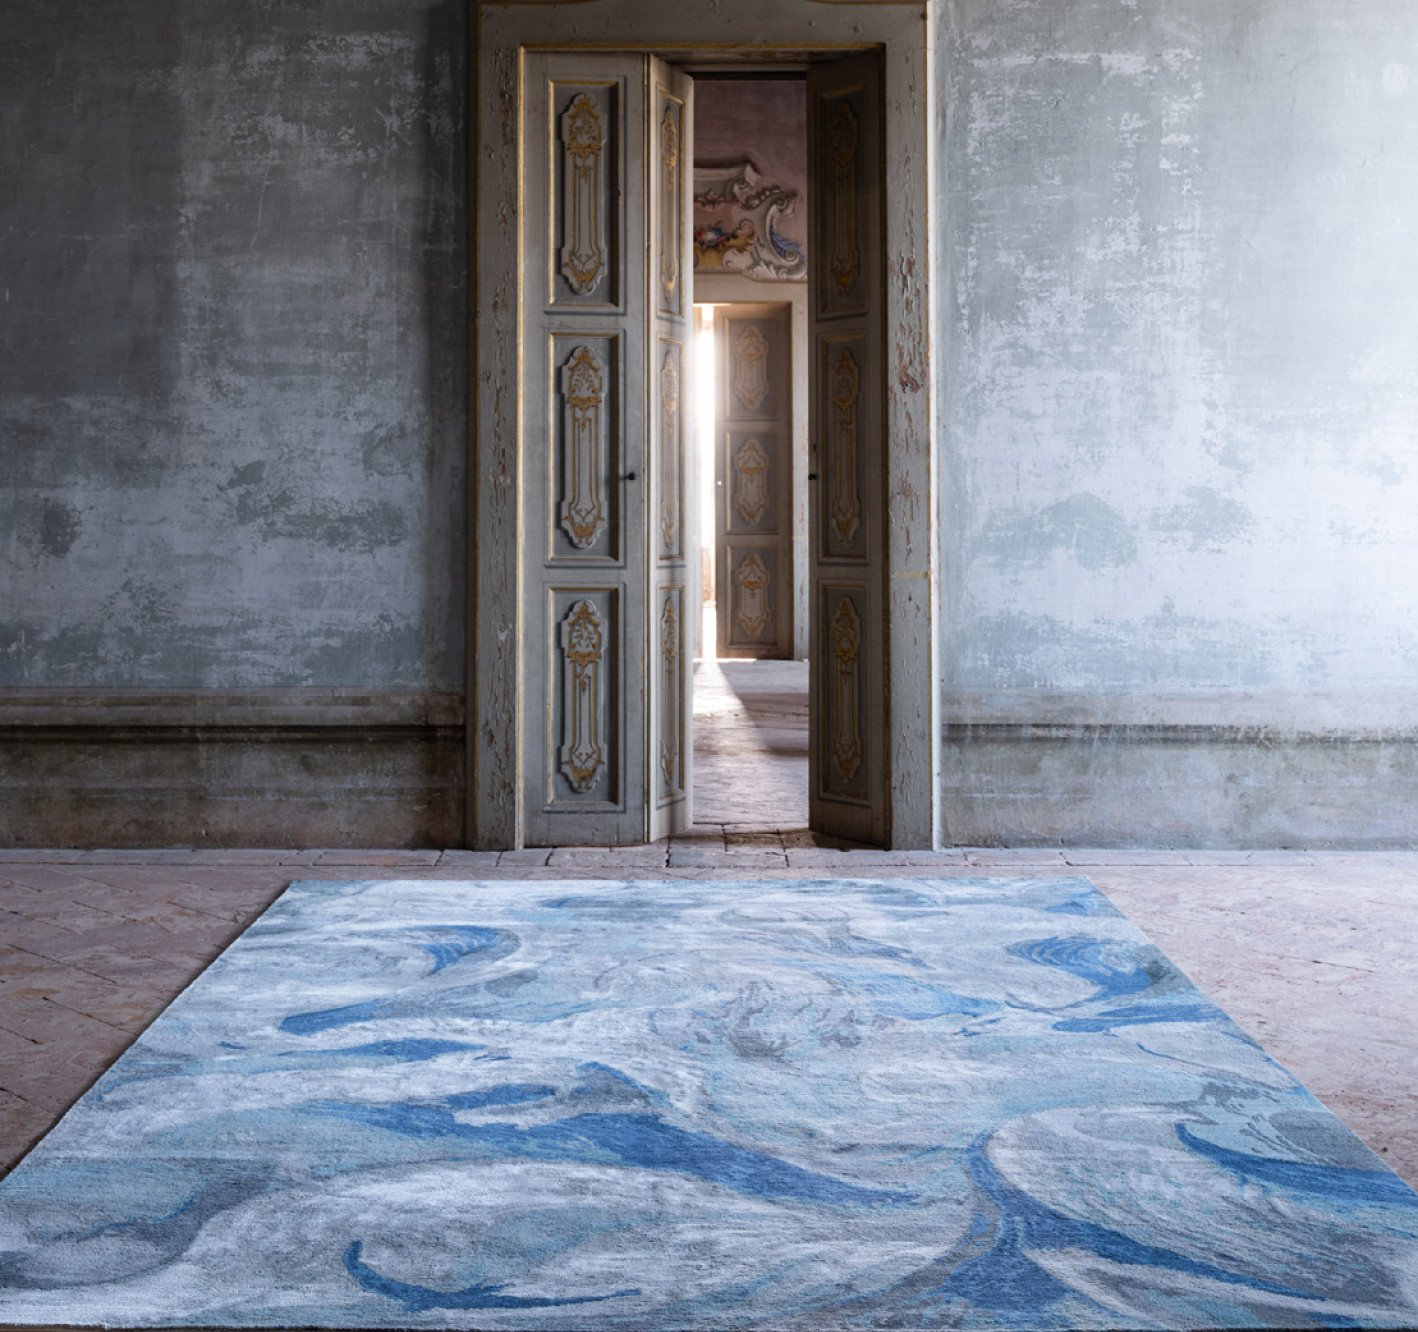 The Rug Company: Subscribe to our Newsletter